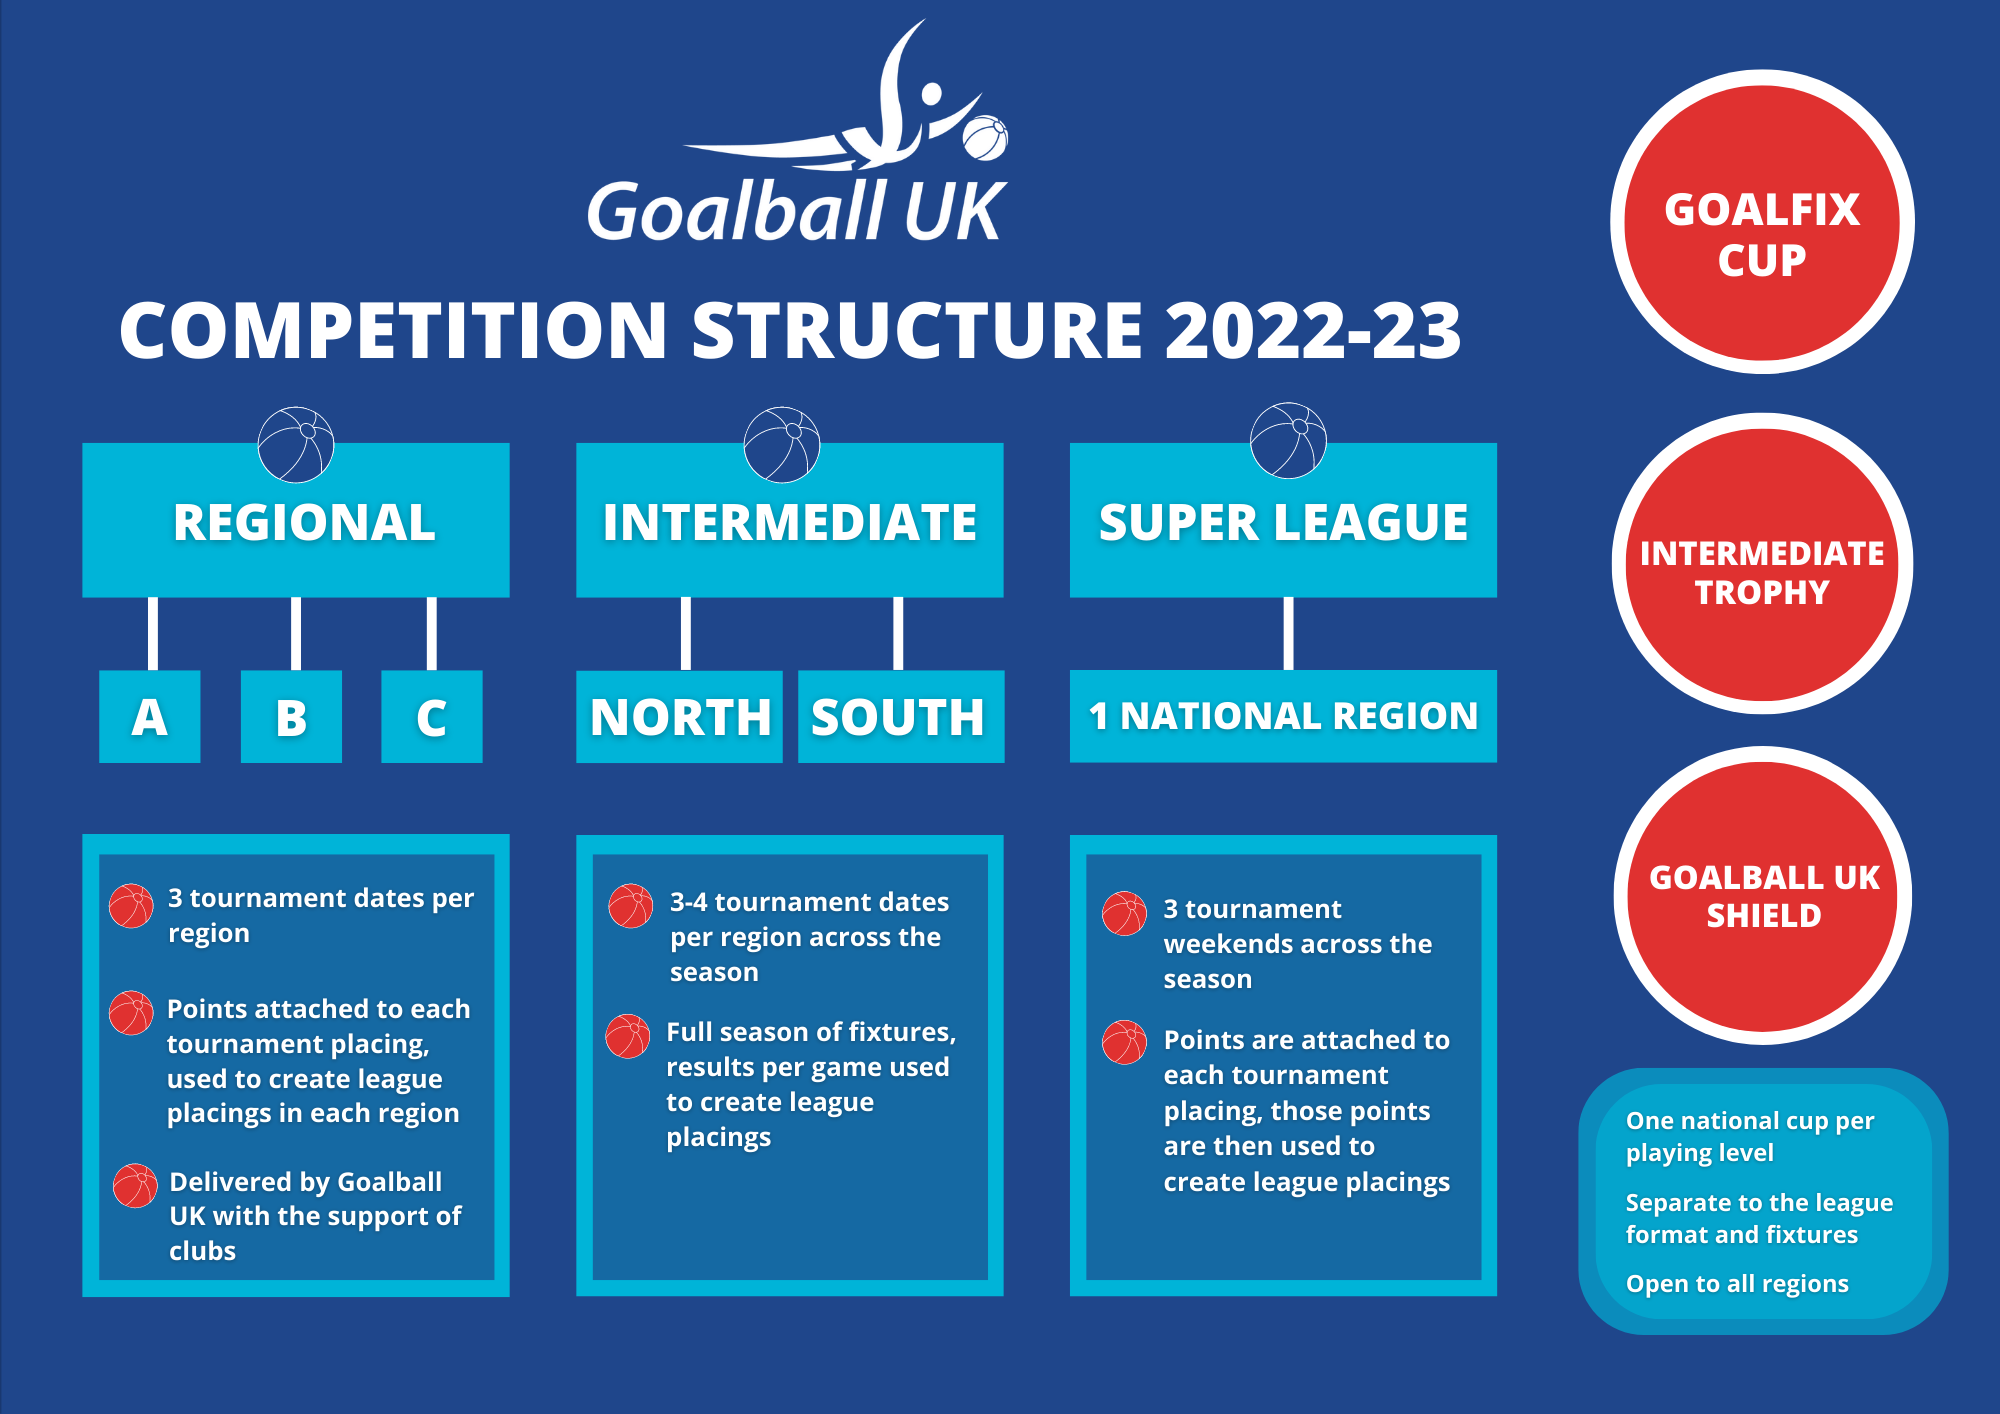 Goalball UK Competition Structure 2022-23 diagram on a blue background. Nationally there are Regional, Intermediate and Super League competitions with 3-4 tournaments across the season which are highlighted in light blue squares. There are also three national trophies which are highlighted in red circles on the right. Each circle has white text which reads 'Goalfix Cup', 'Intermediate Trophy' and 'Goalball UK Shield'.